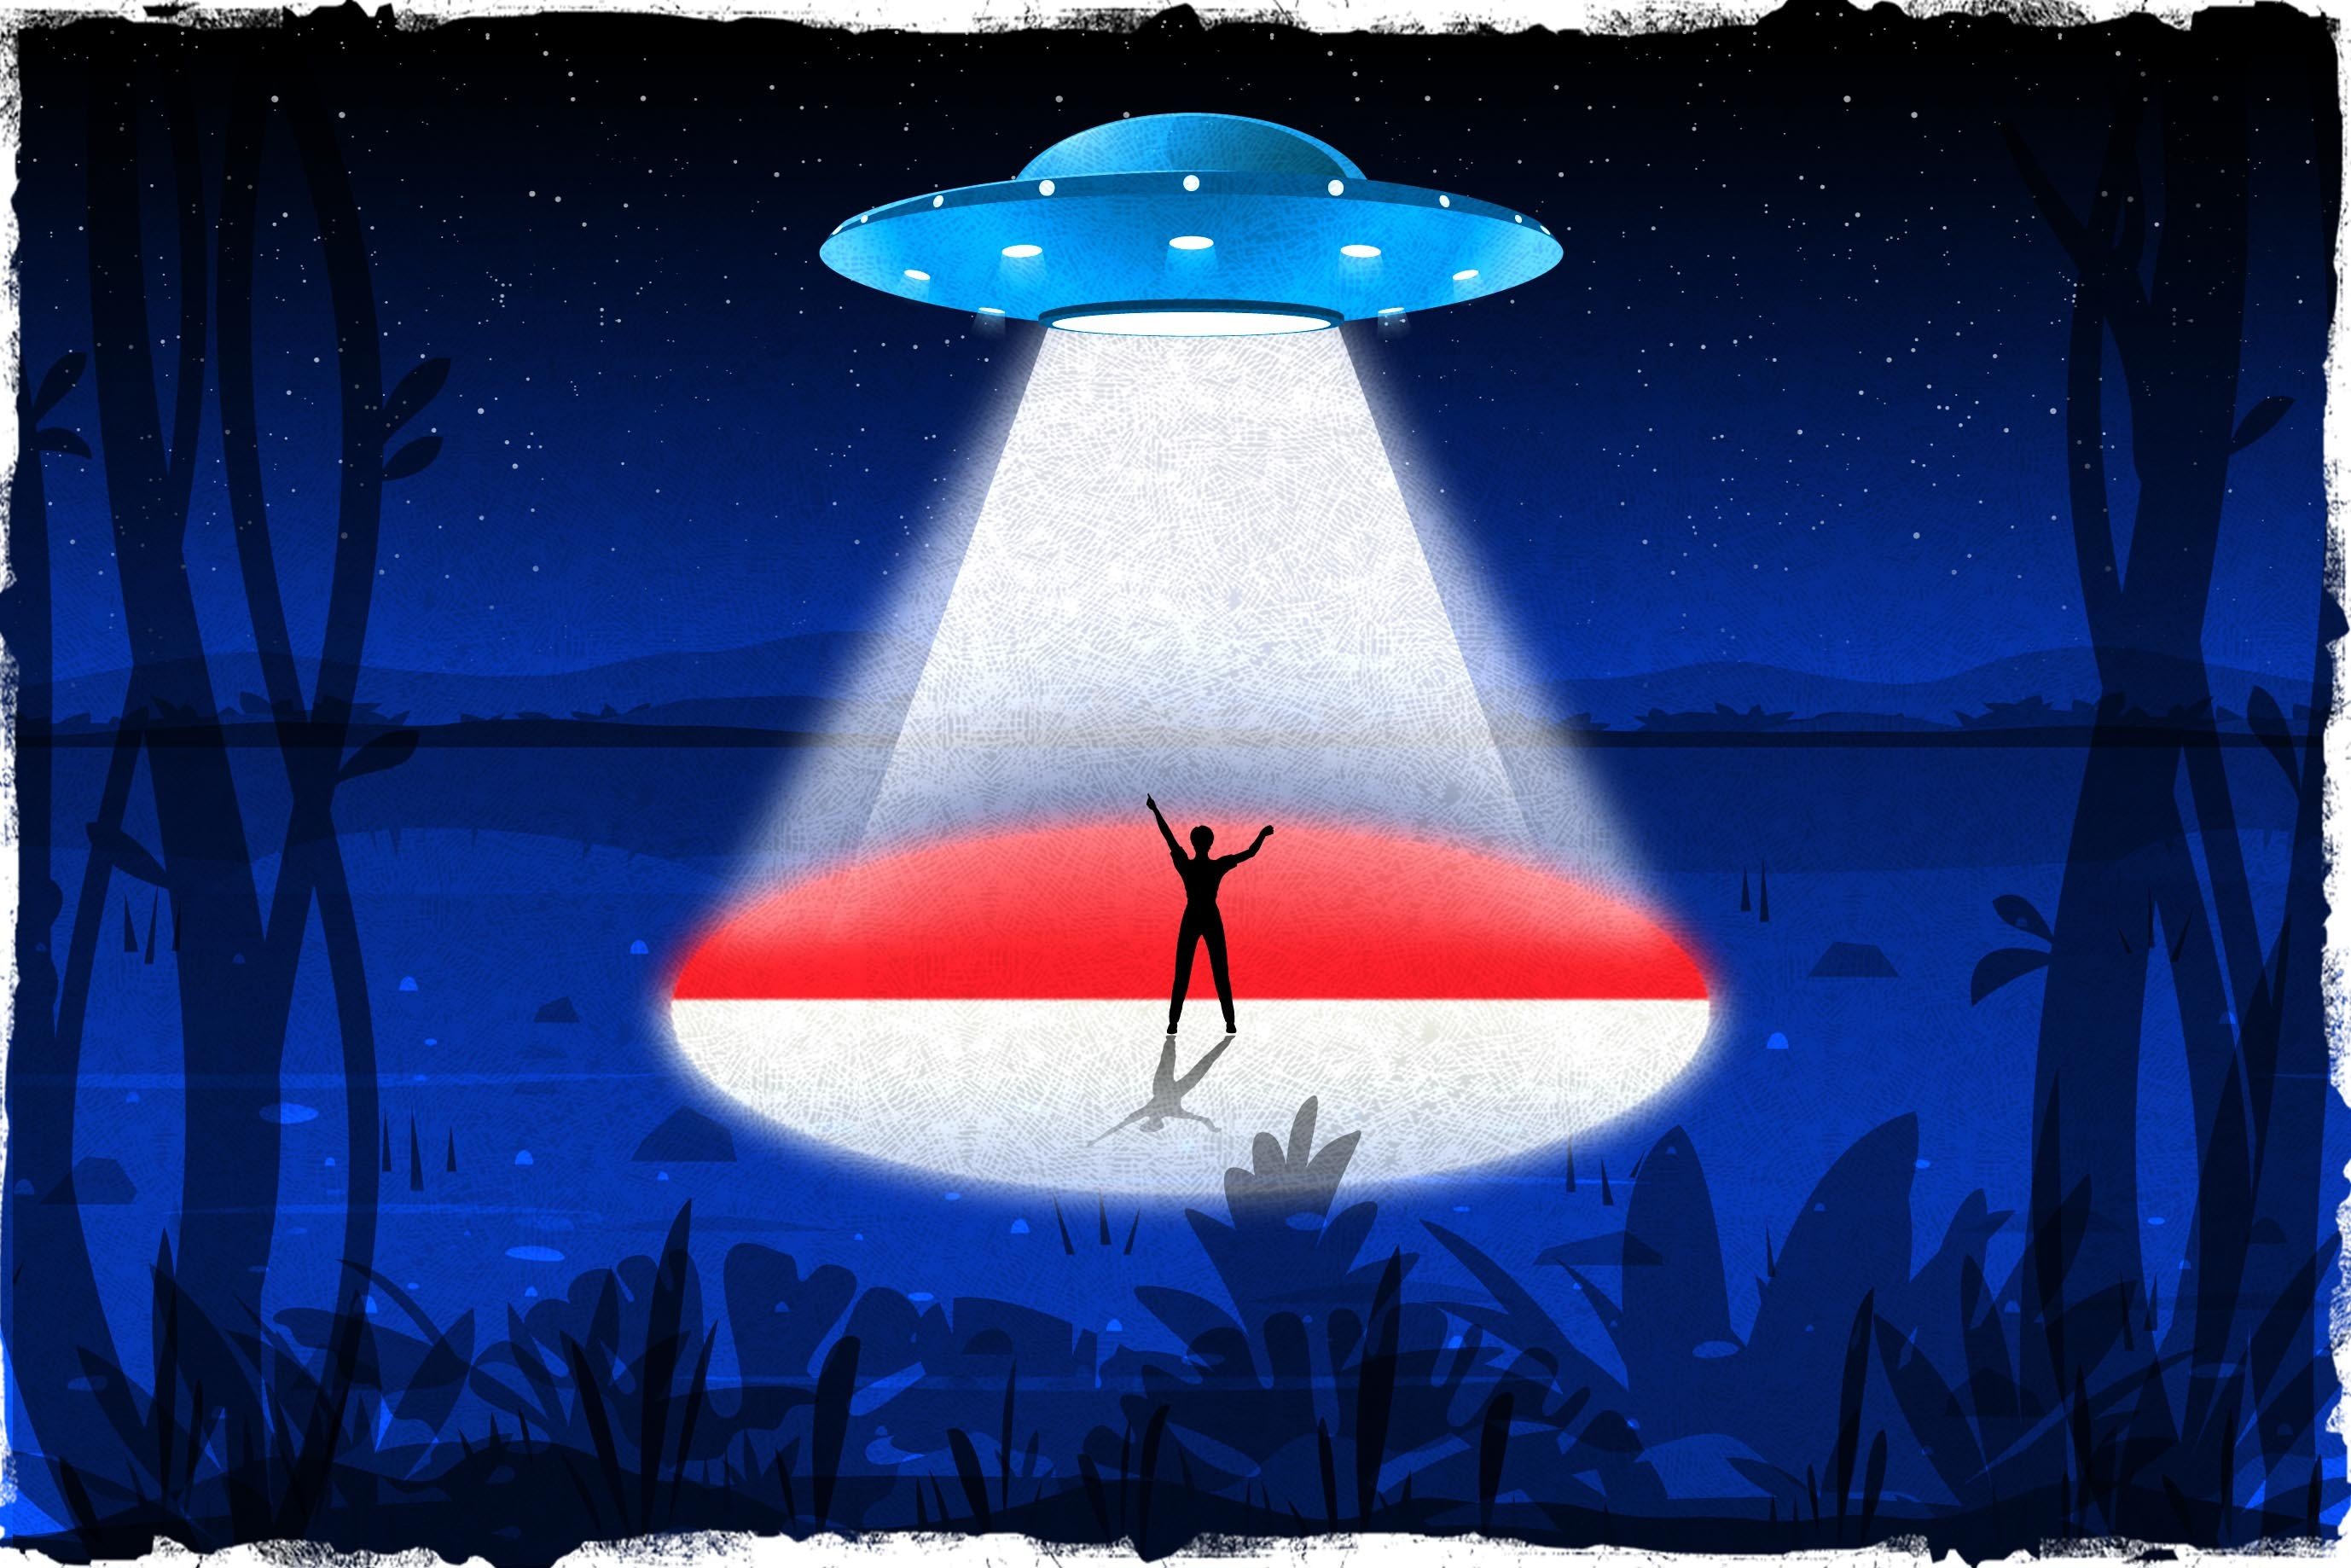 Do aliens exist in outer space? Indonesians who believe life really does exist out there are likely to be part of a growing online community called Beta-UFO, made up of more than 13,000 active members.